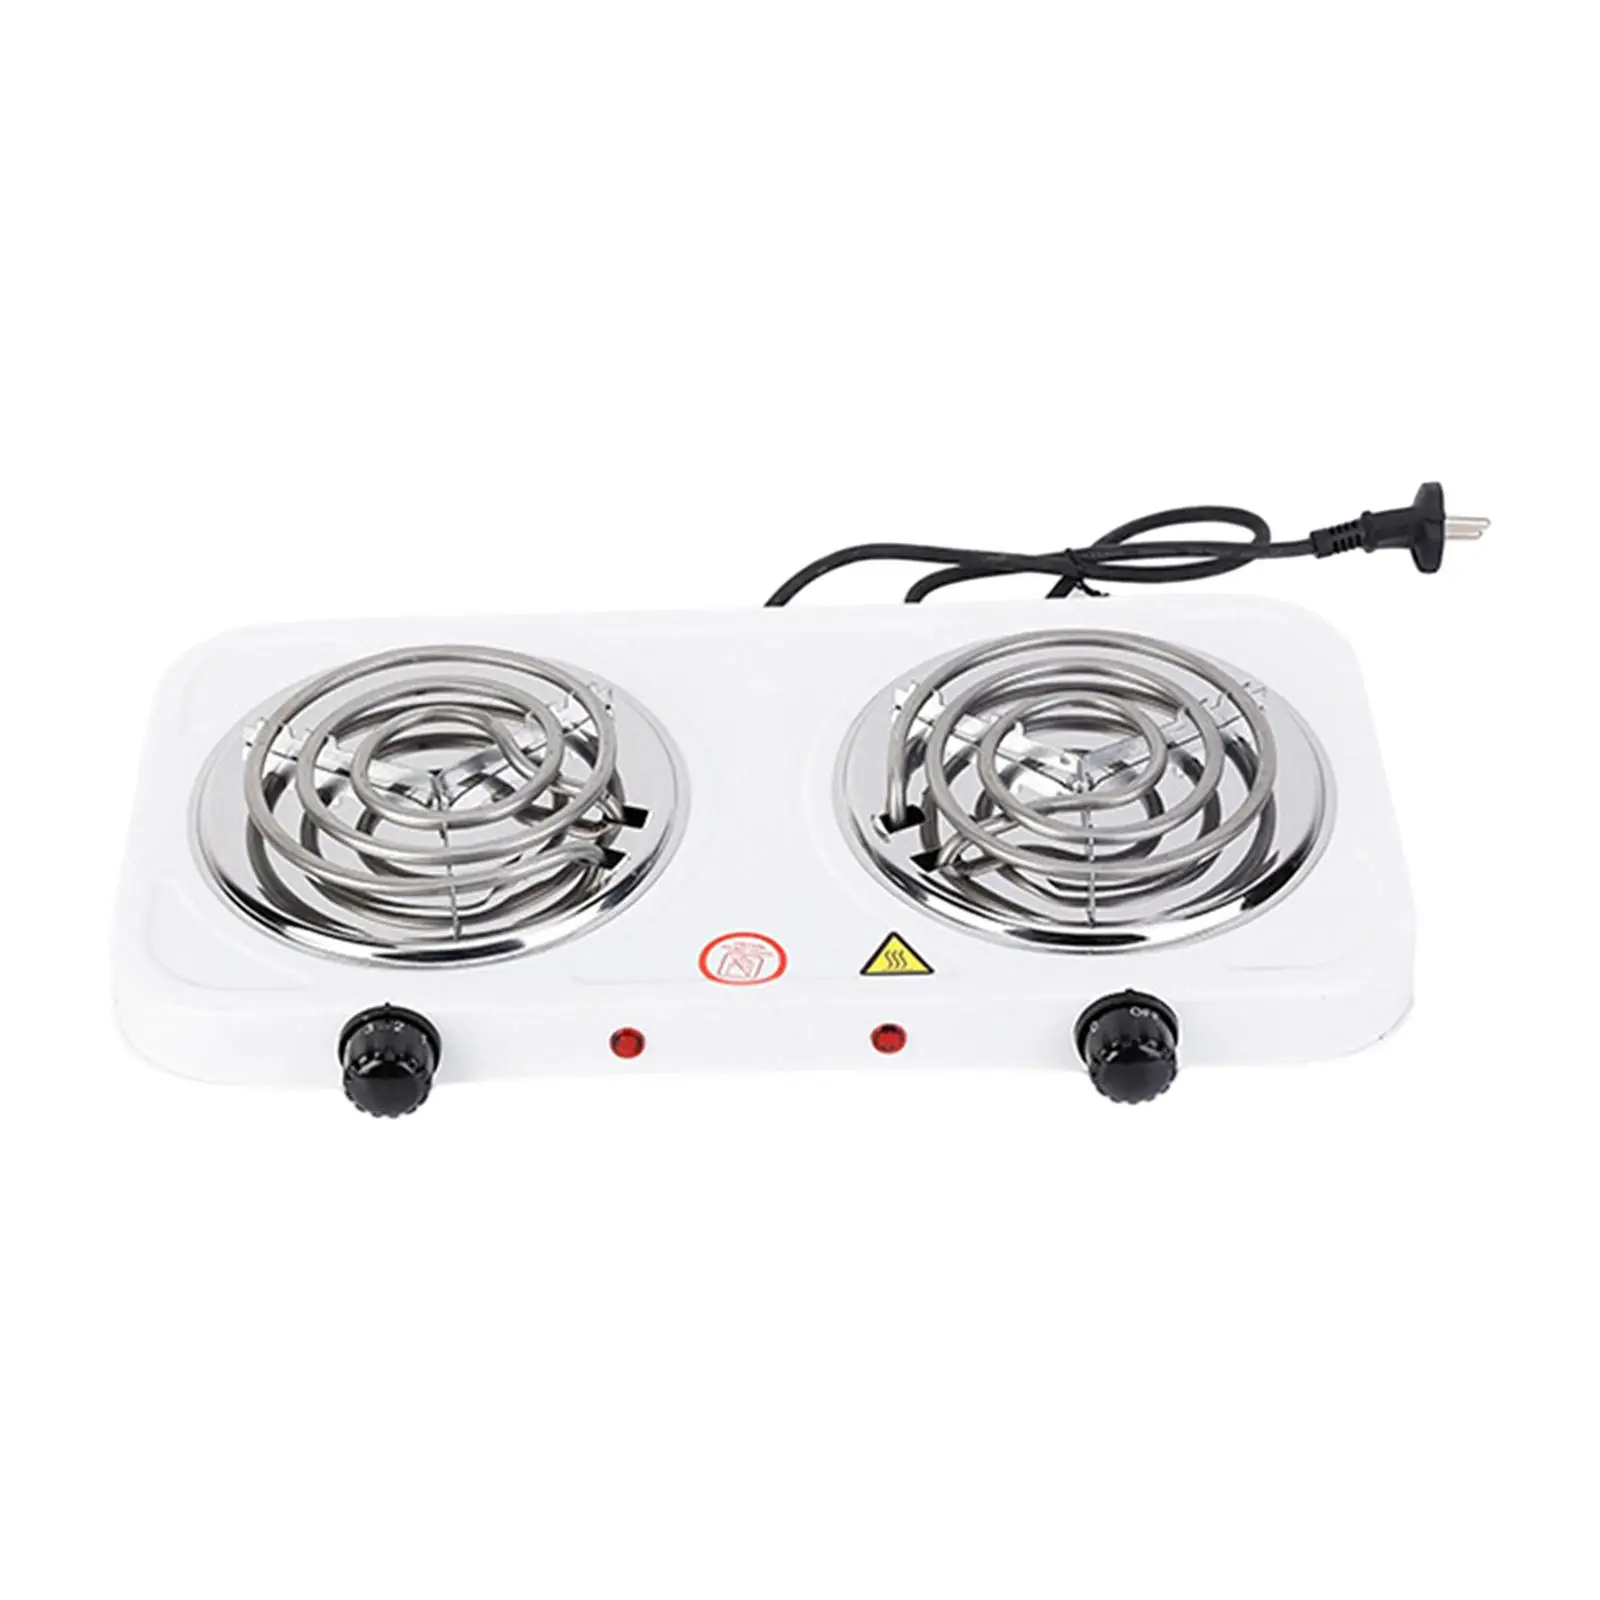 Portable Electric Coil Burner Easy to Clean 2000W Adjustable Temperature Knob Electric Cooktop White Countertop Burner